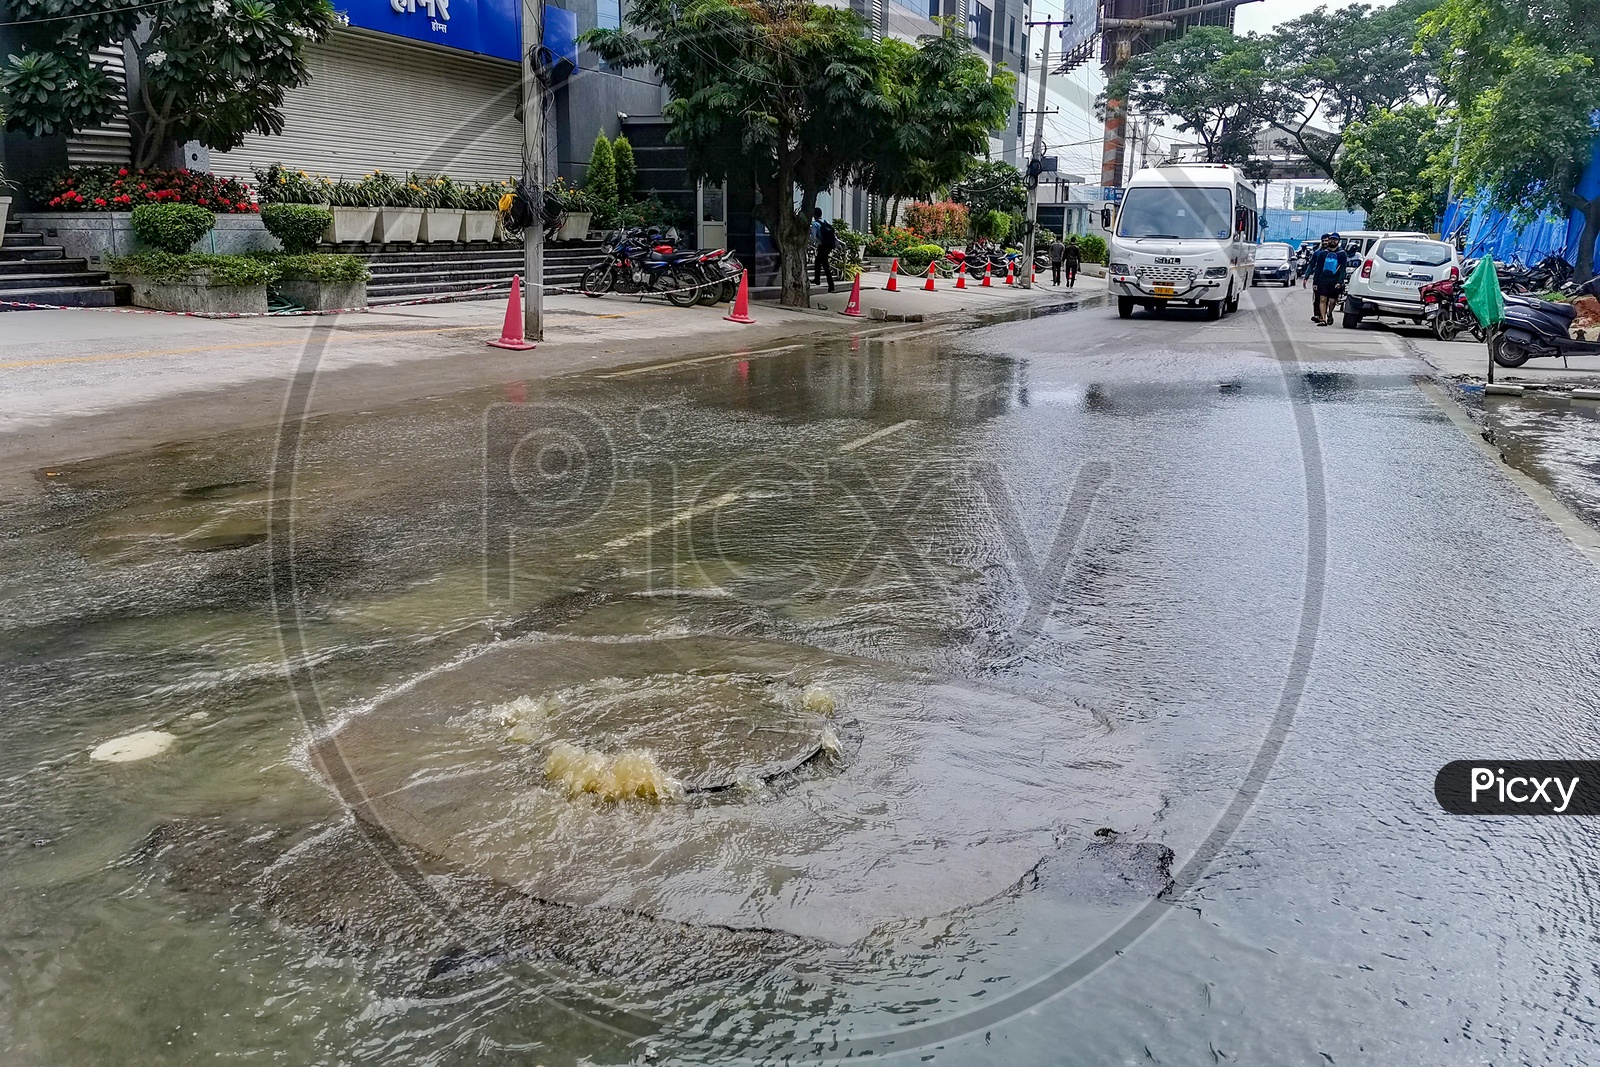 Overflowing Manholes  With Drainage Or Sewage Water in a Street